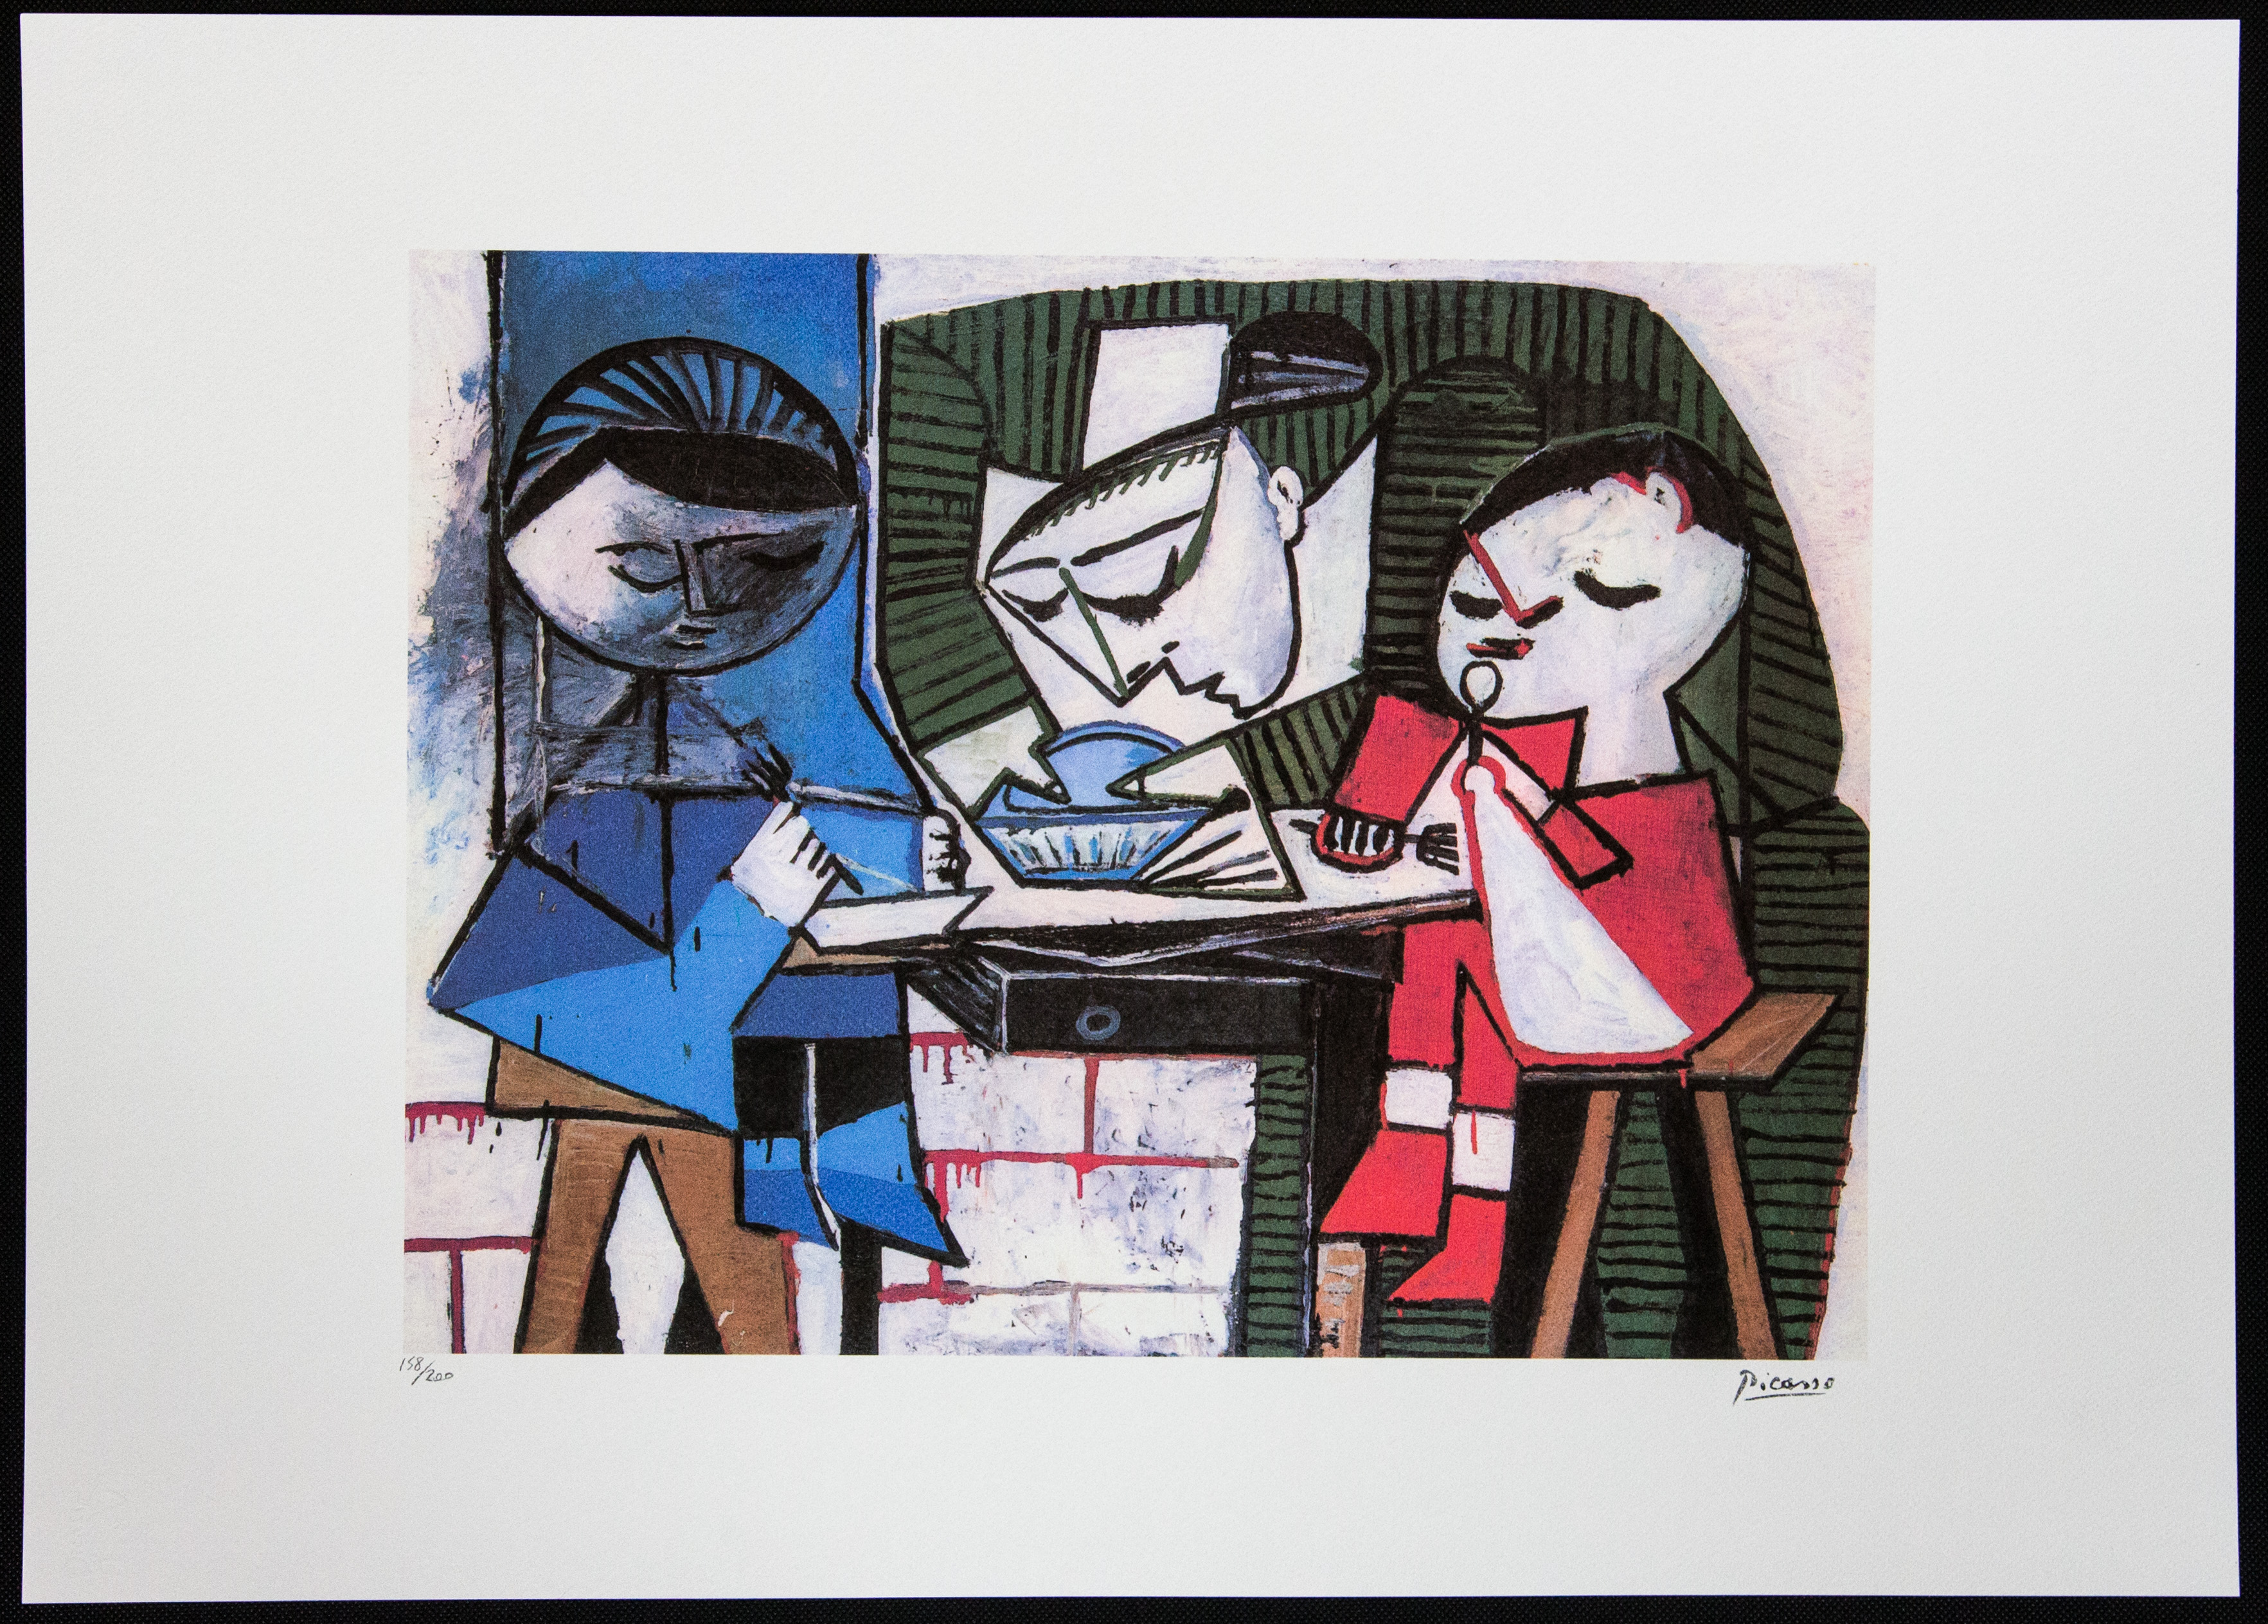 Pablo Picasso 'Breakfast' - Image 2 of 6